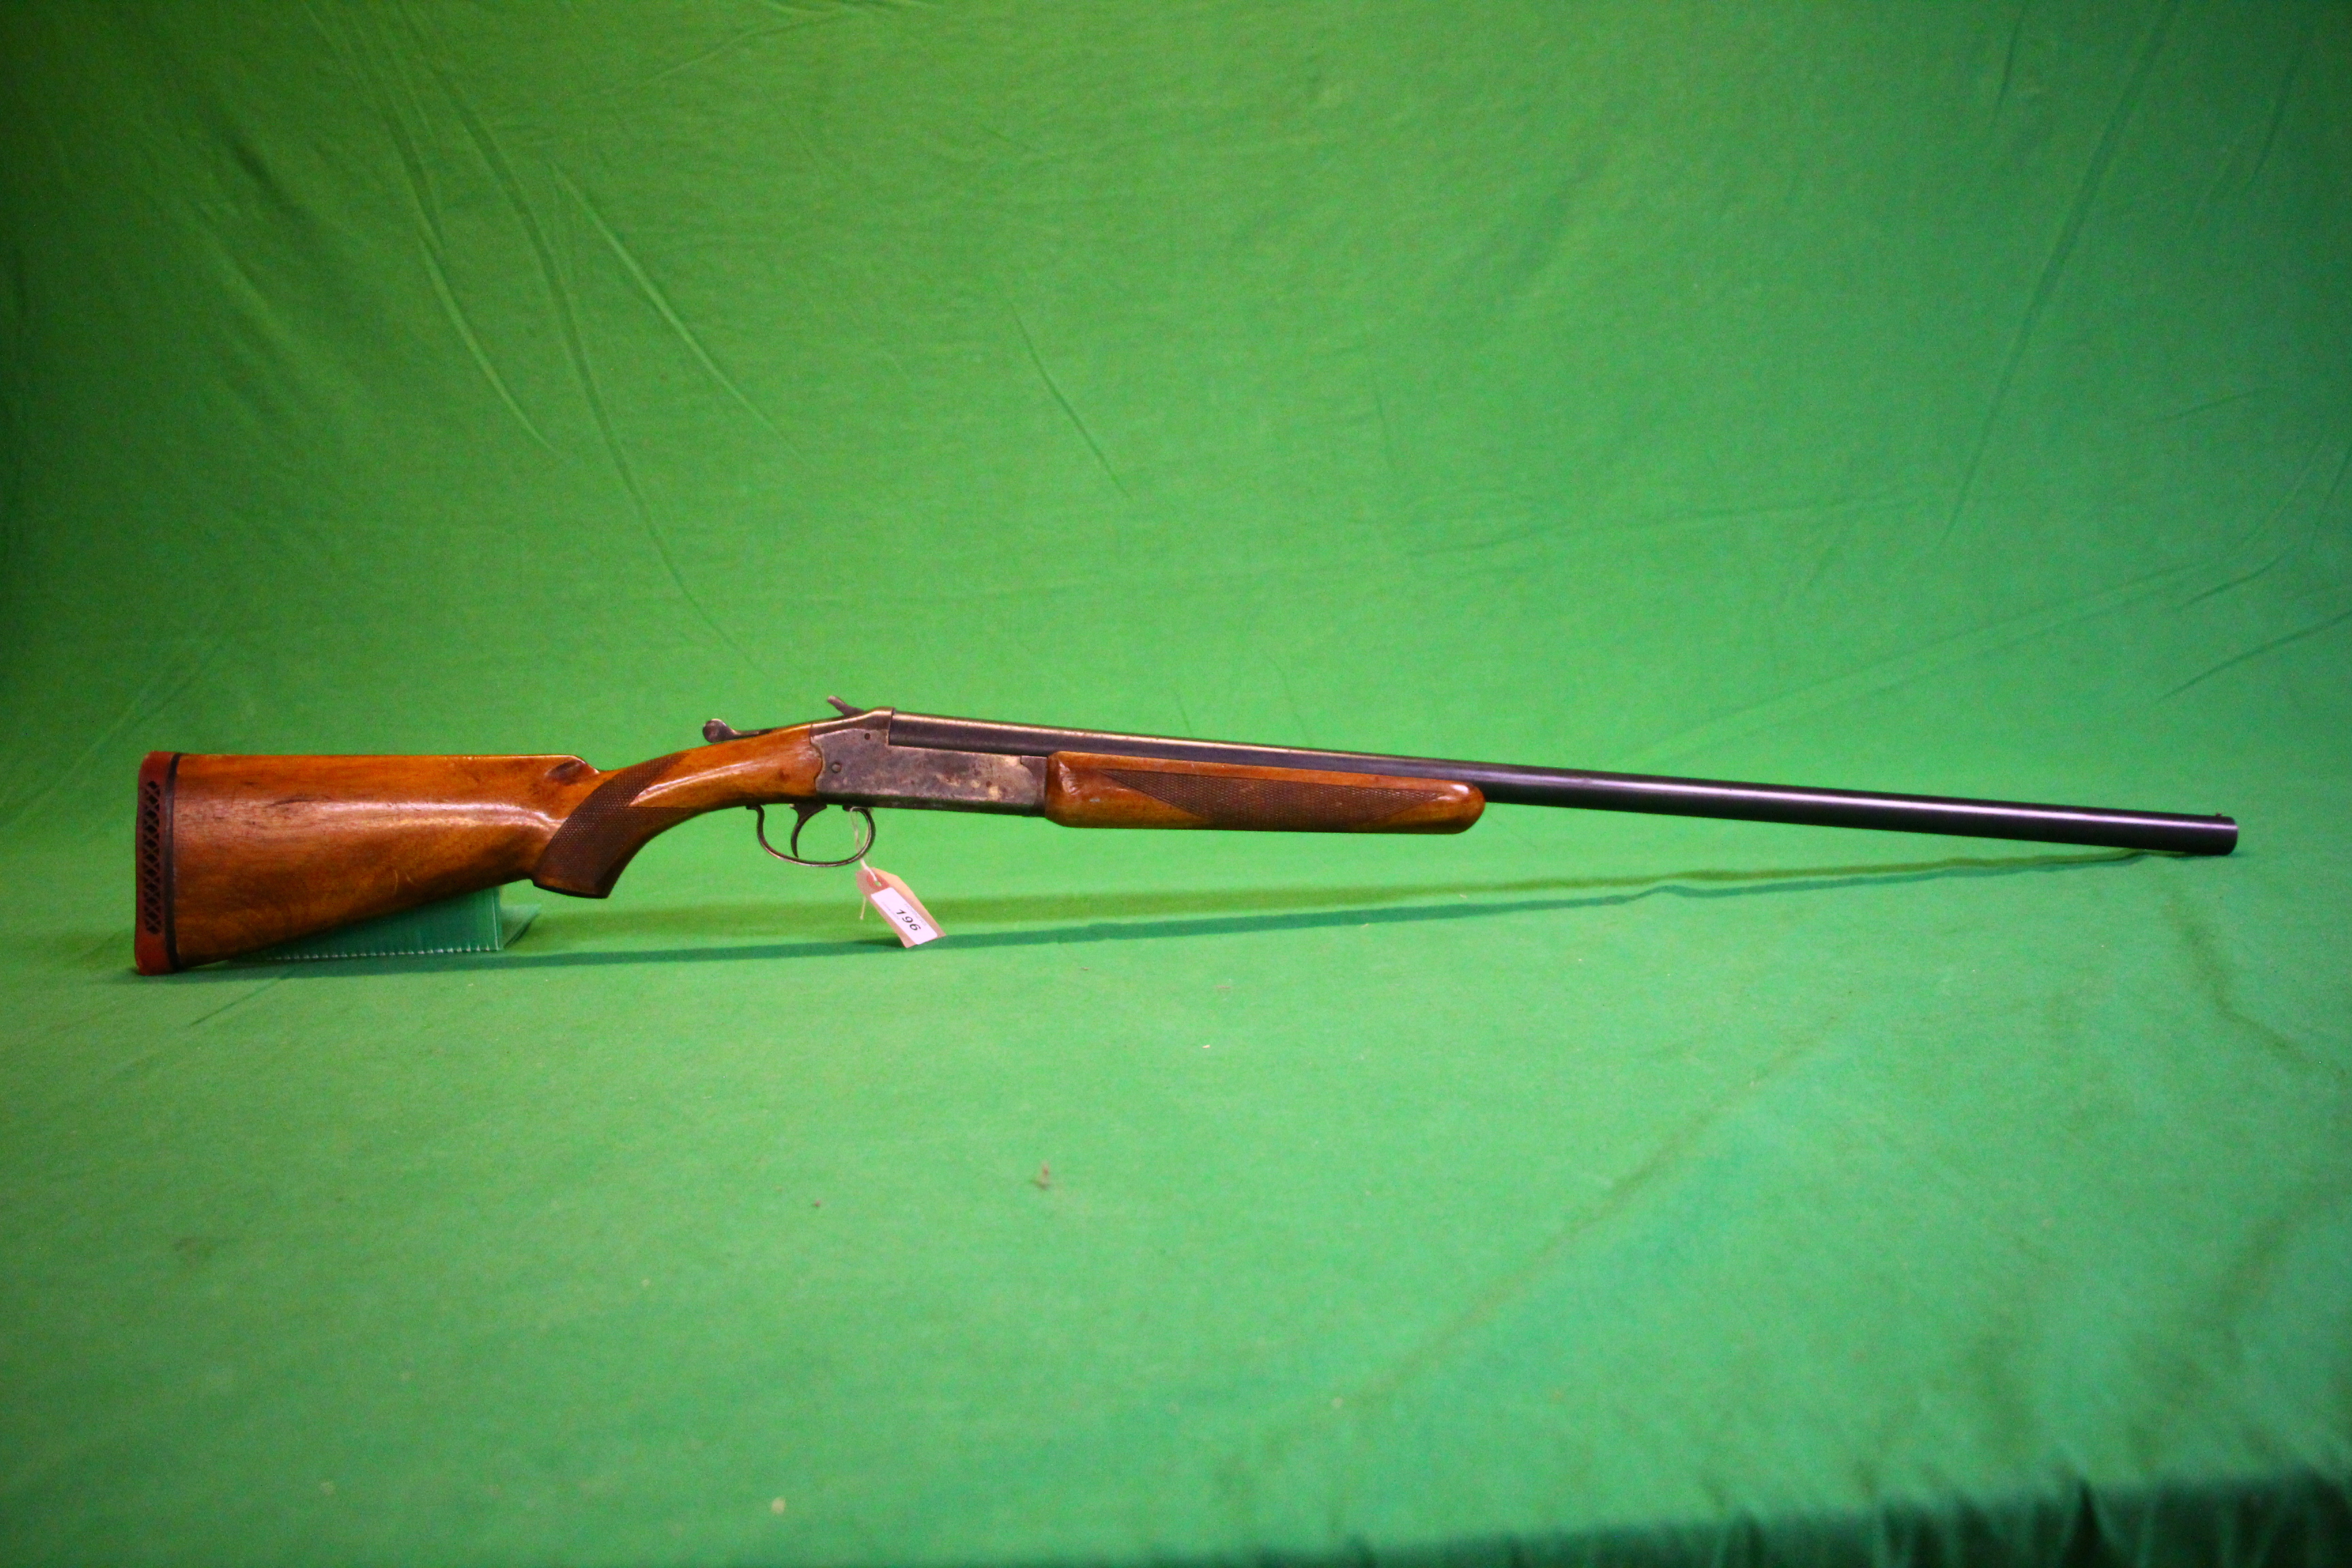 AYA 12 BORE SINGLE SHOT SHOTGUN #159134 - (ALL GUNS TO BE INSPECTED AND SERVICED BY QUALIFIED